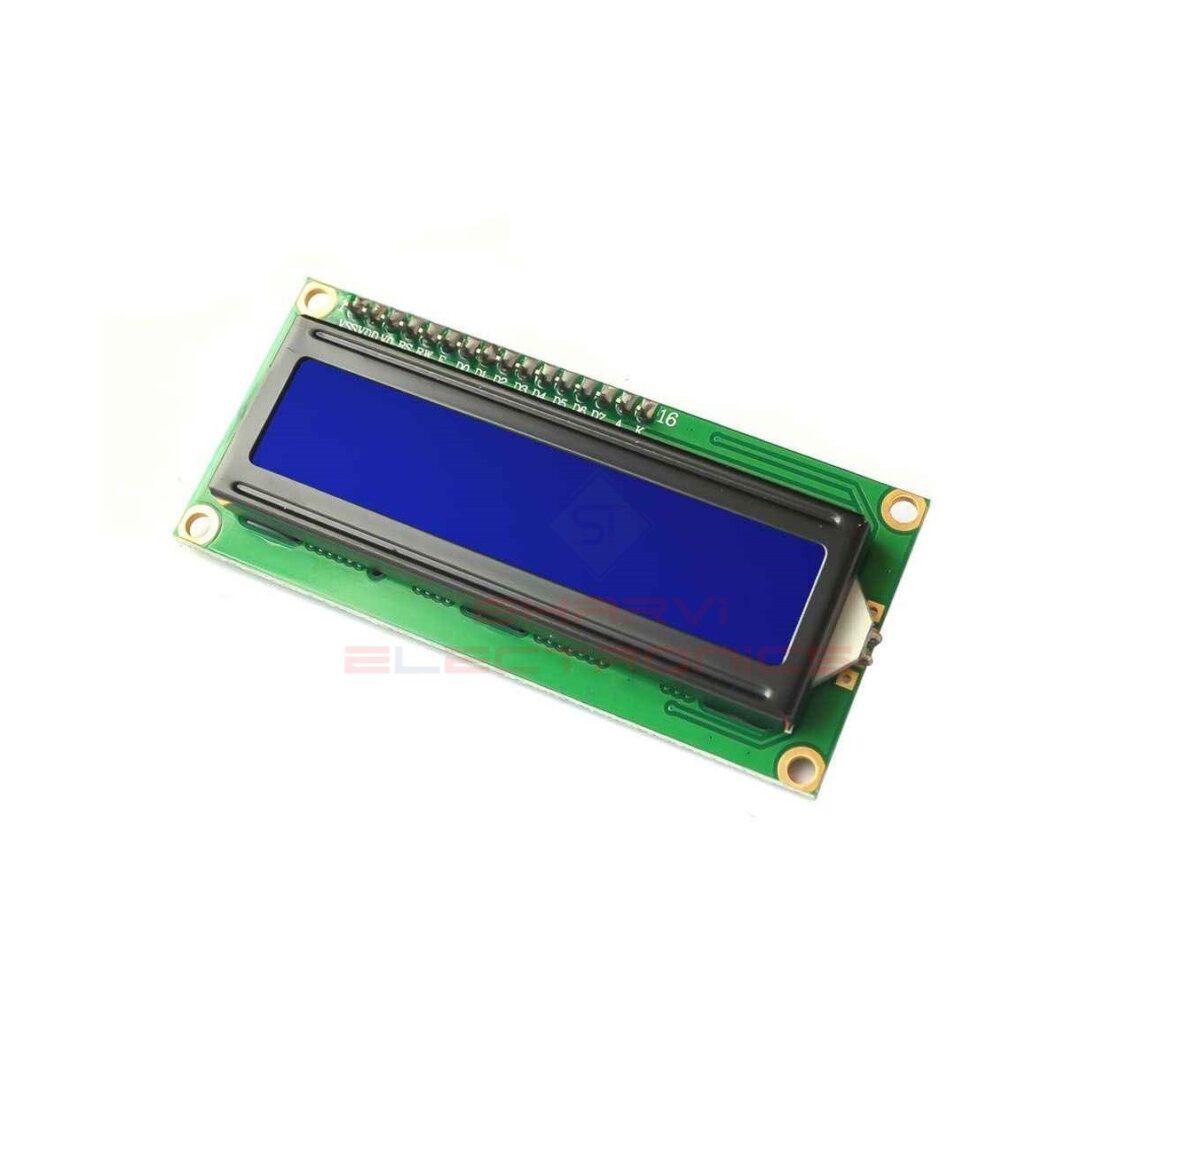 16×2 LCD Display Blue Backlight with I2C-IIC interface sharvielectronics